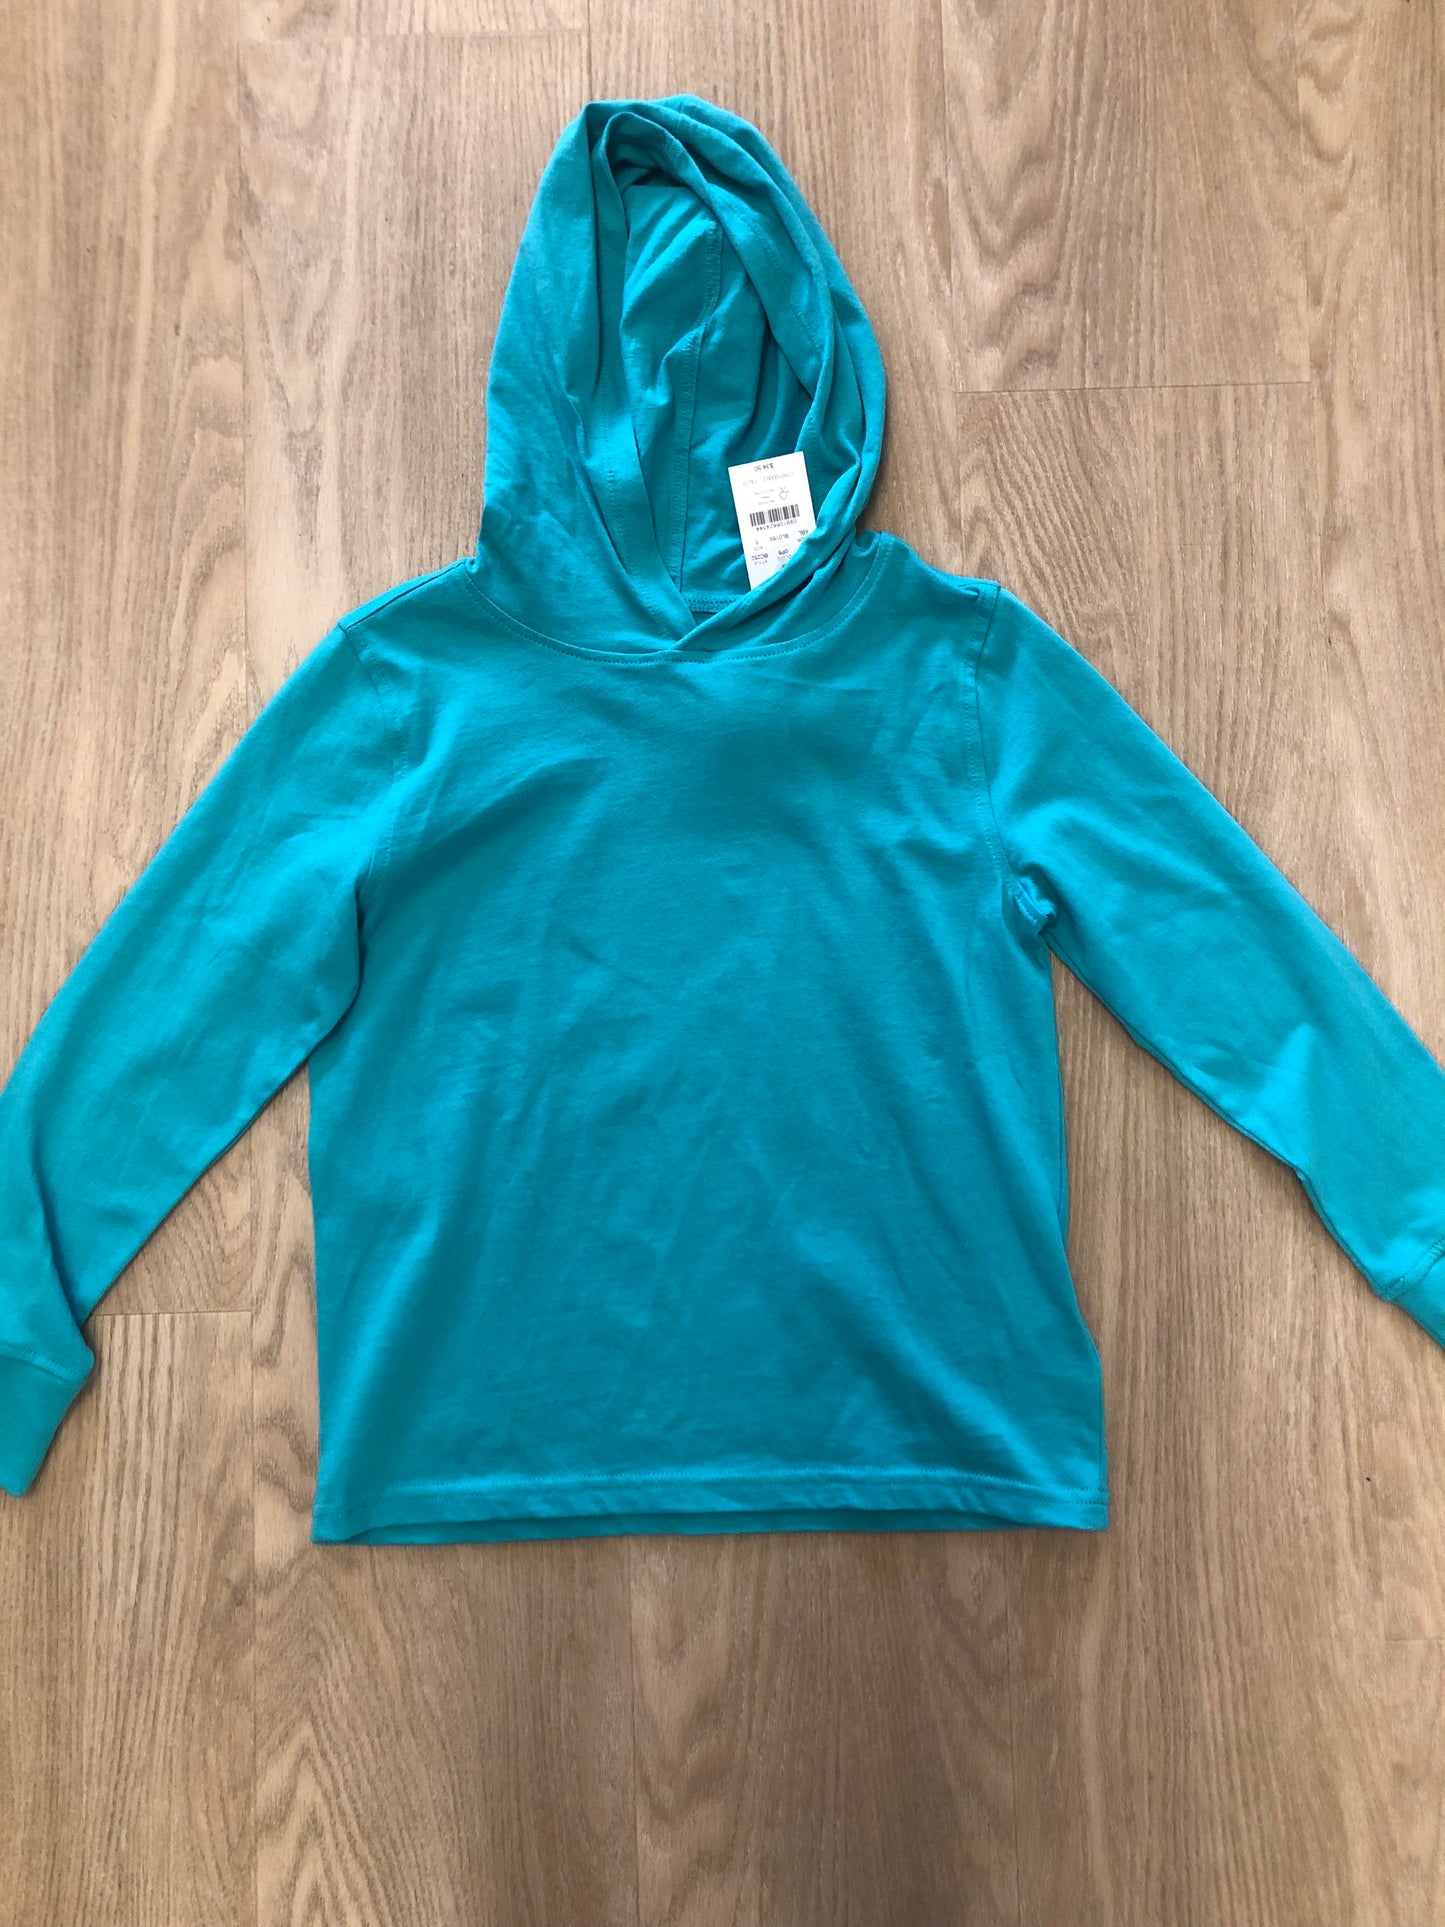 crewcuts Child Size 6 Blue Hooded Shirt